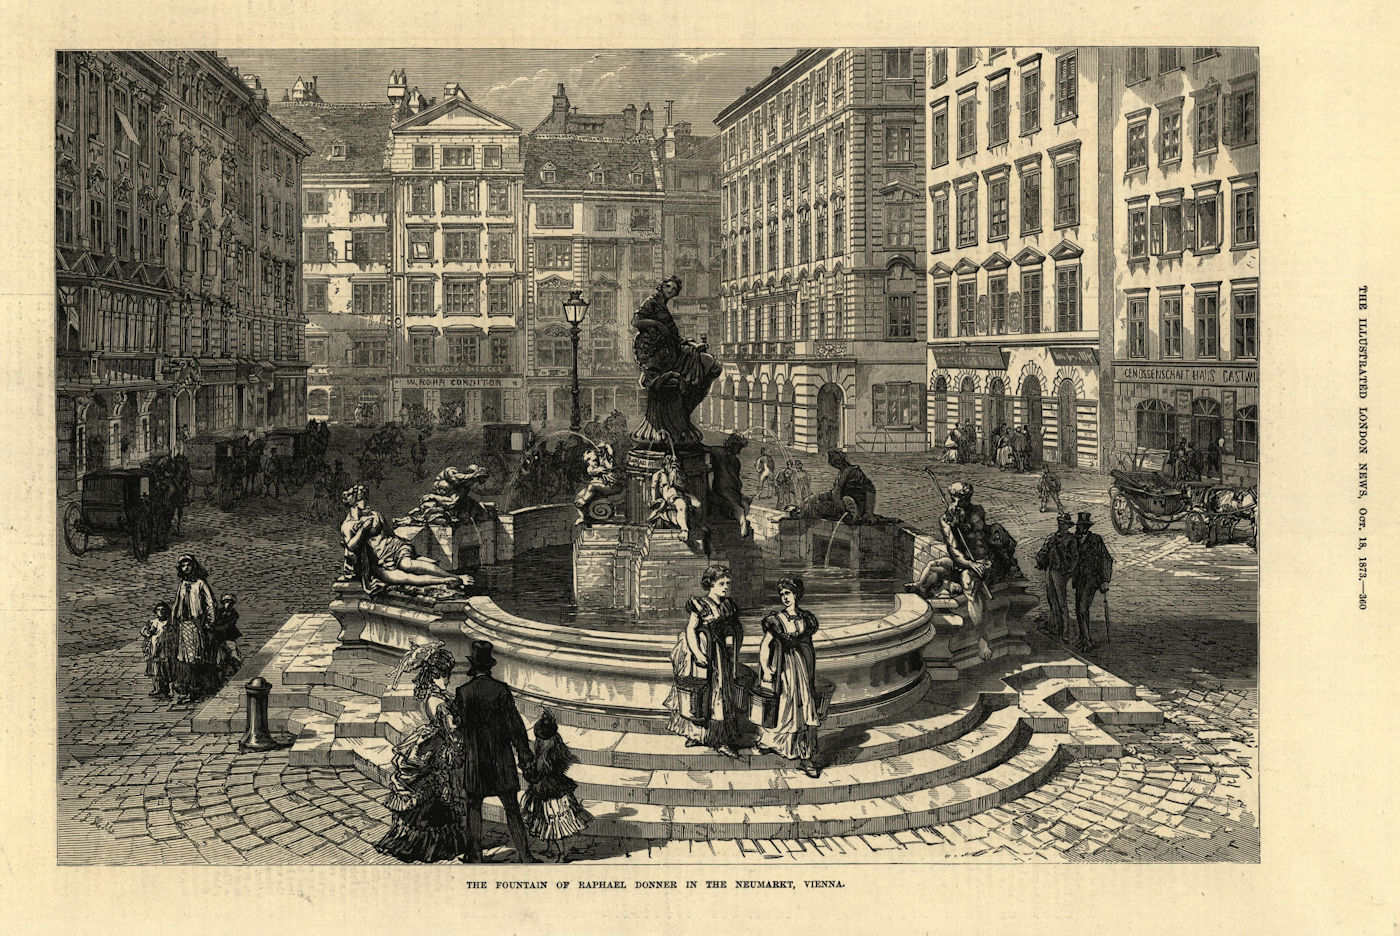 Associate Product The fountain of Raphael Donner in the Neumarkt, Vienna. Austria 1873 ILN print